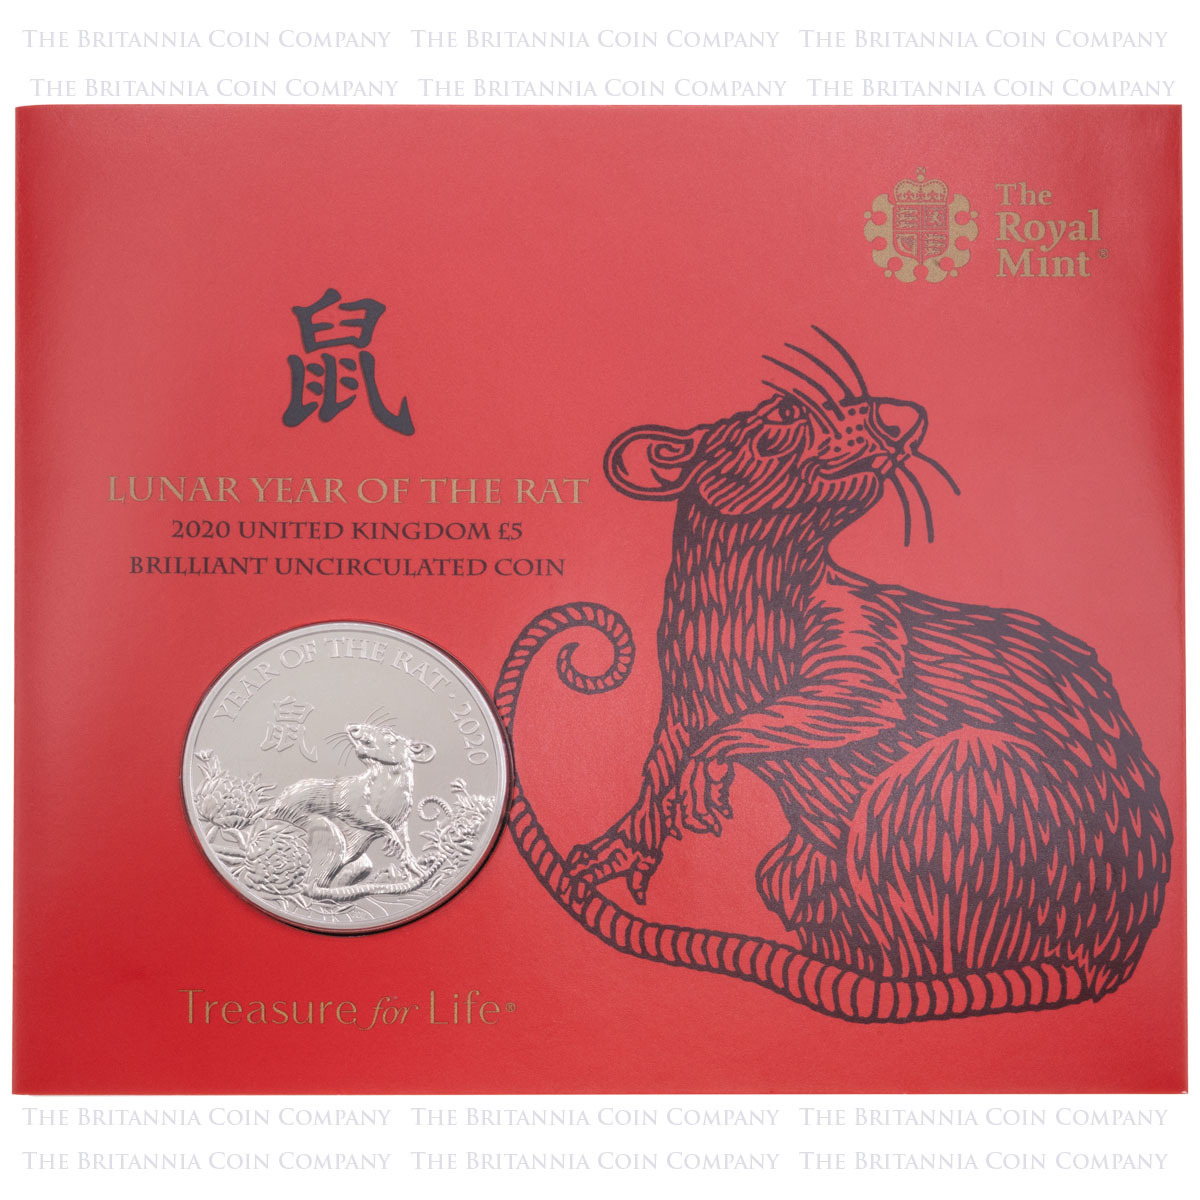 UKR20BU 2020 Lunar Year Of The Rat Five Pound Brilliant Uncirculated Coin In Folder